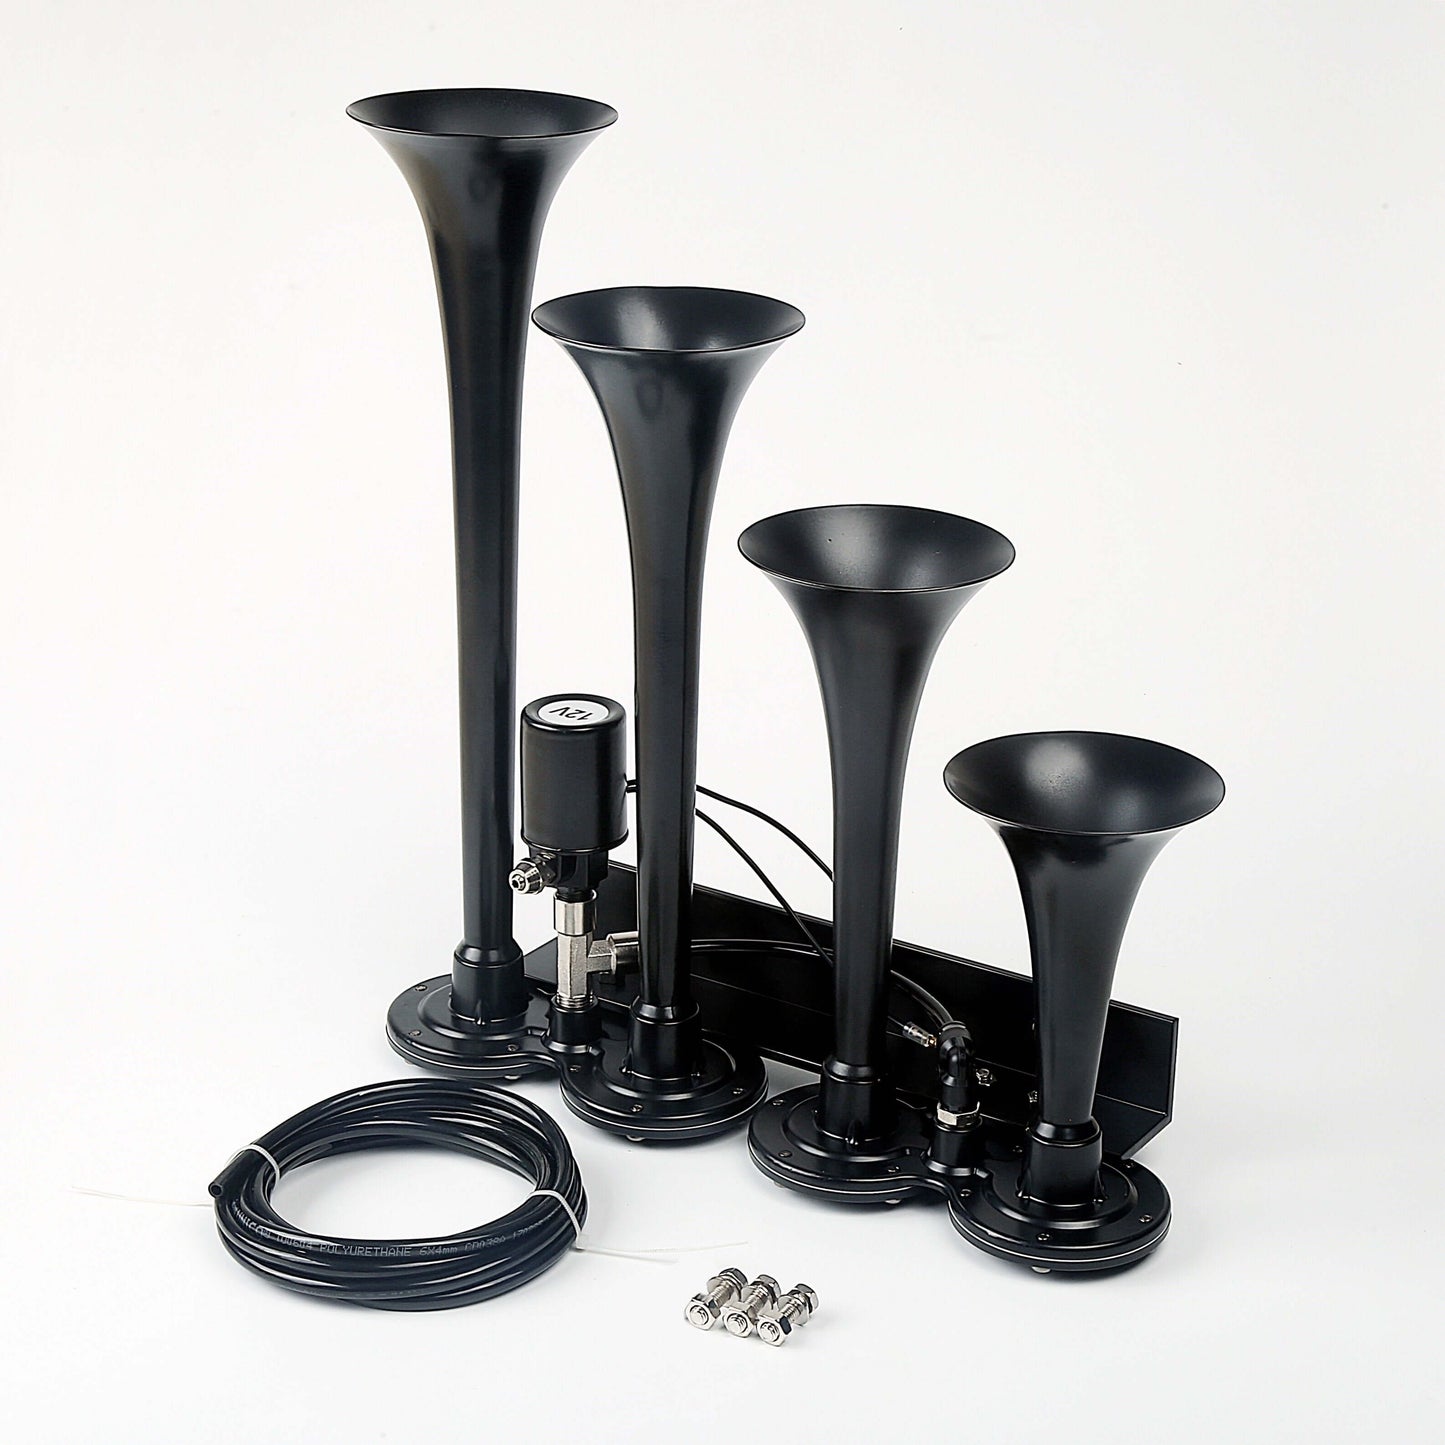 [UNIQUE OFFER] MasterBlaster 1.5Gal Horn Kit 4-Second Honk Time 